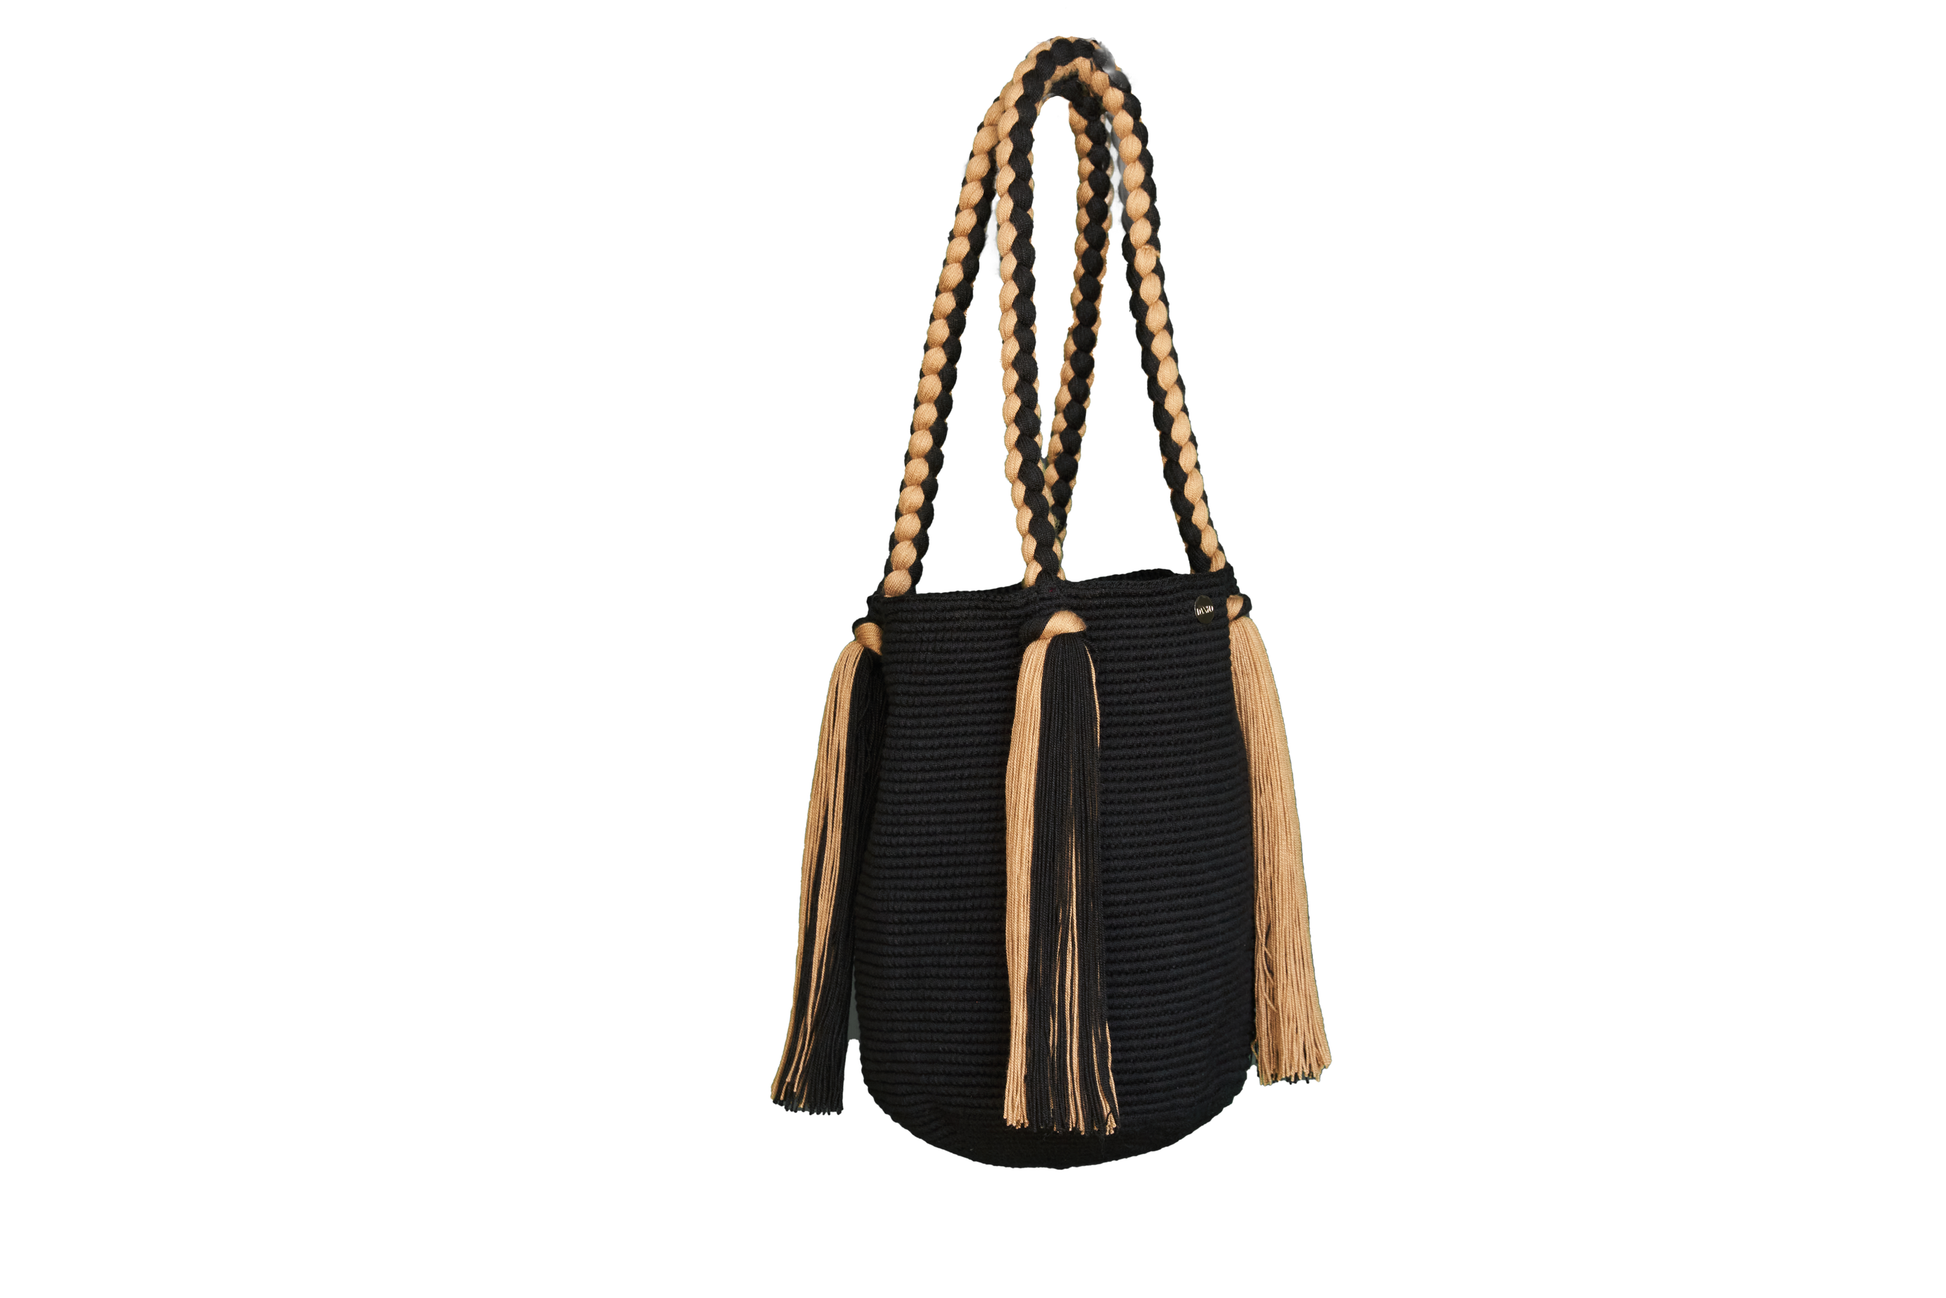 Handmade Black and Beige Tote With Long Tassels